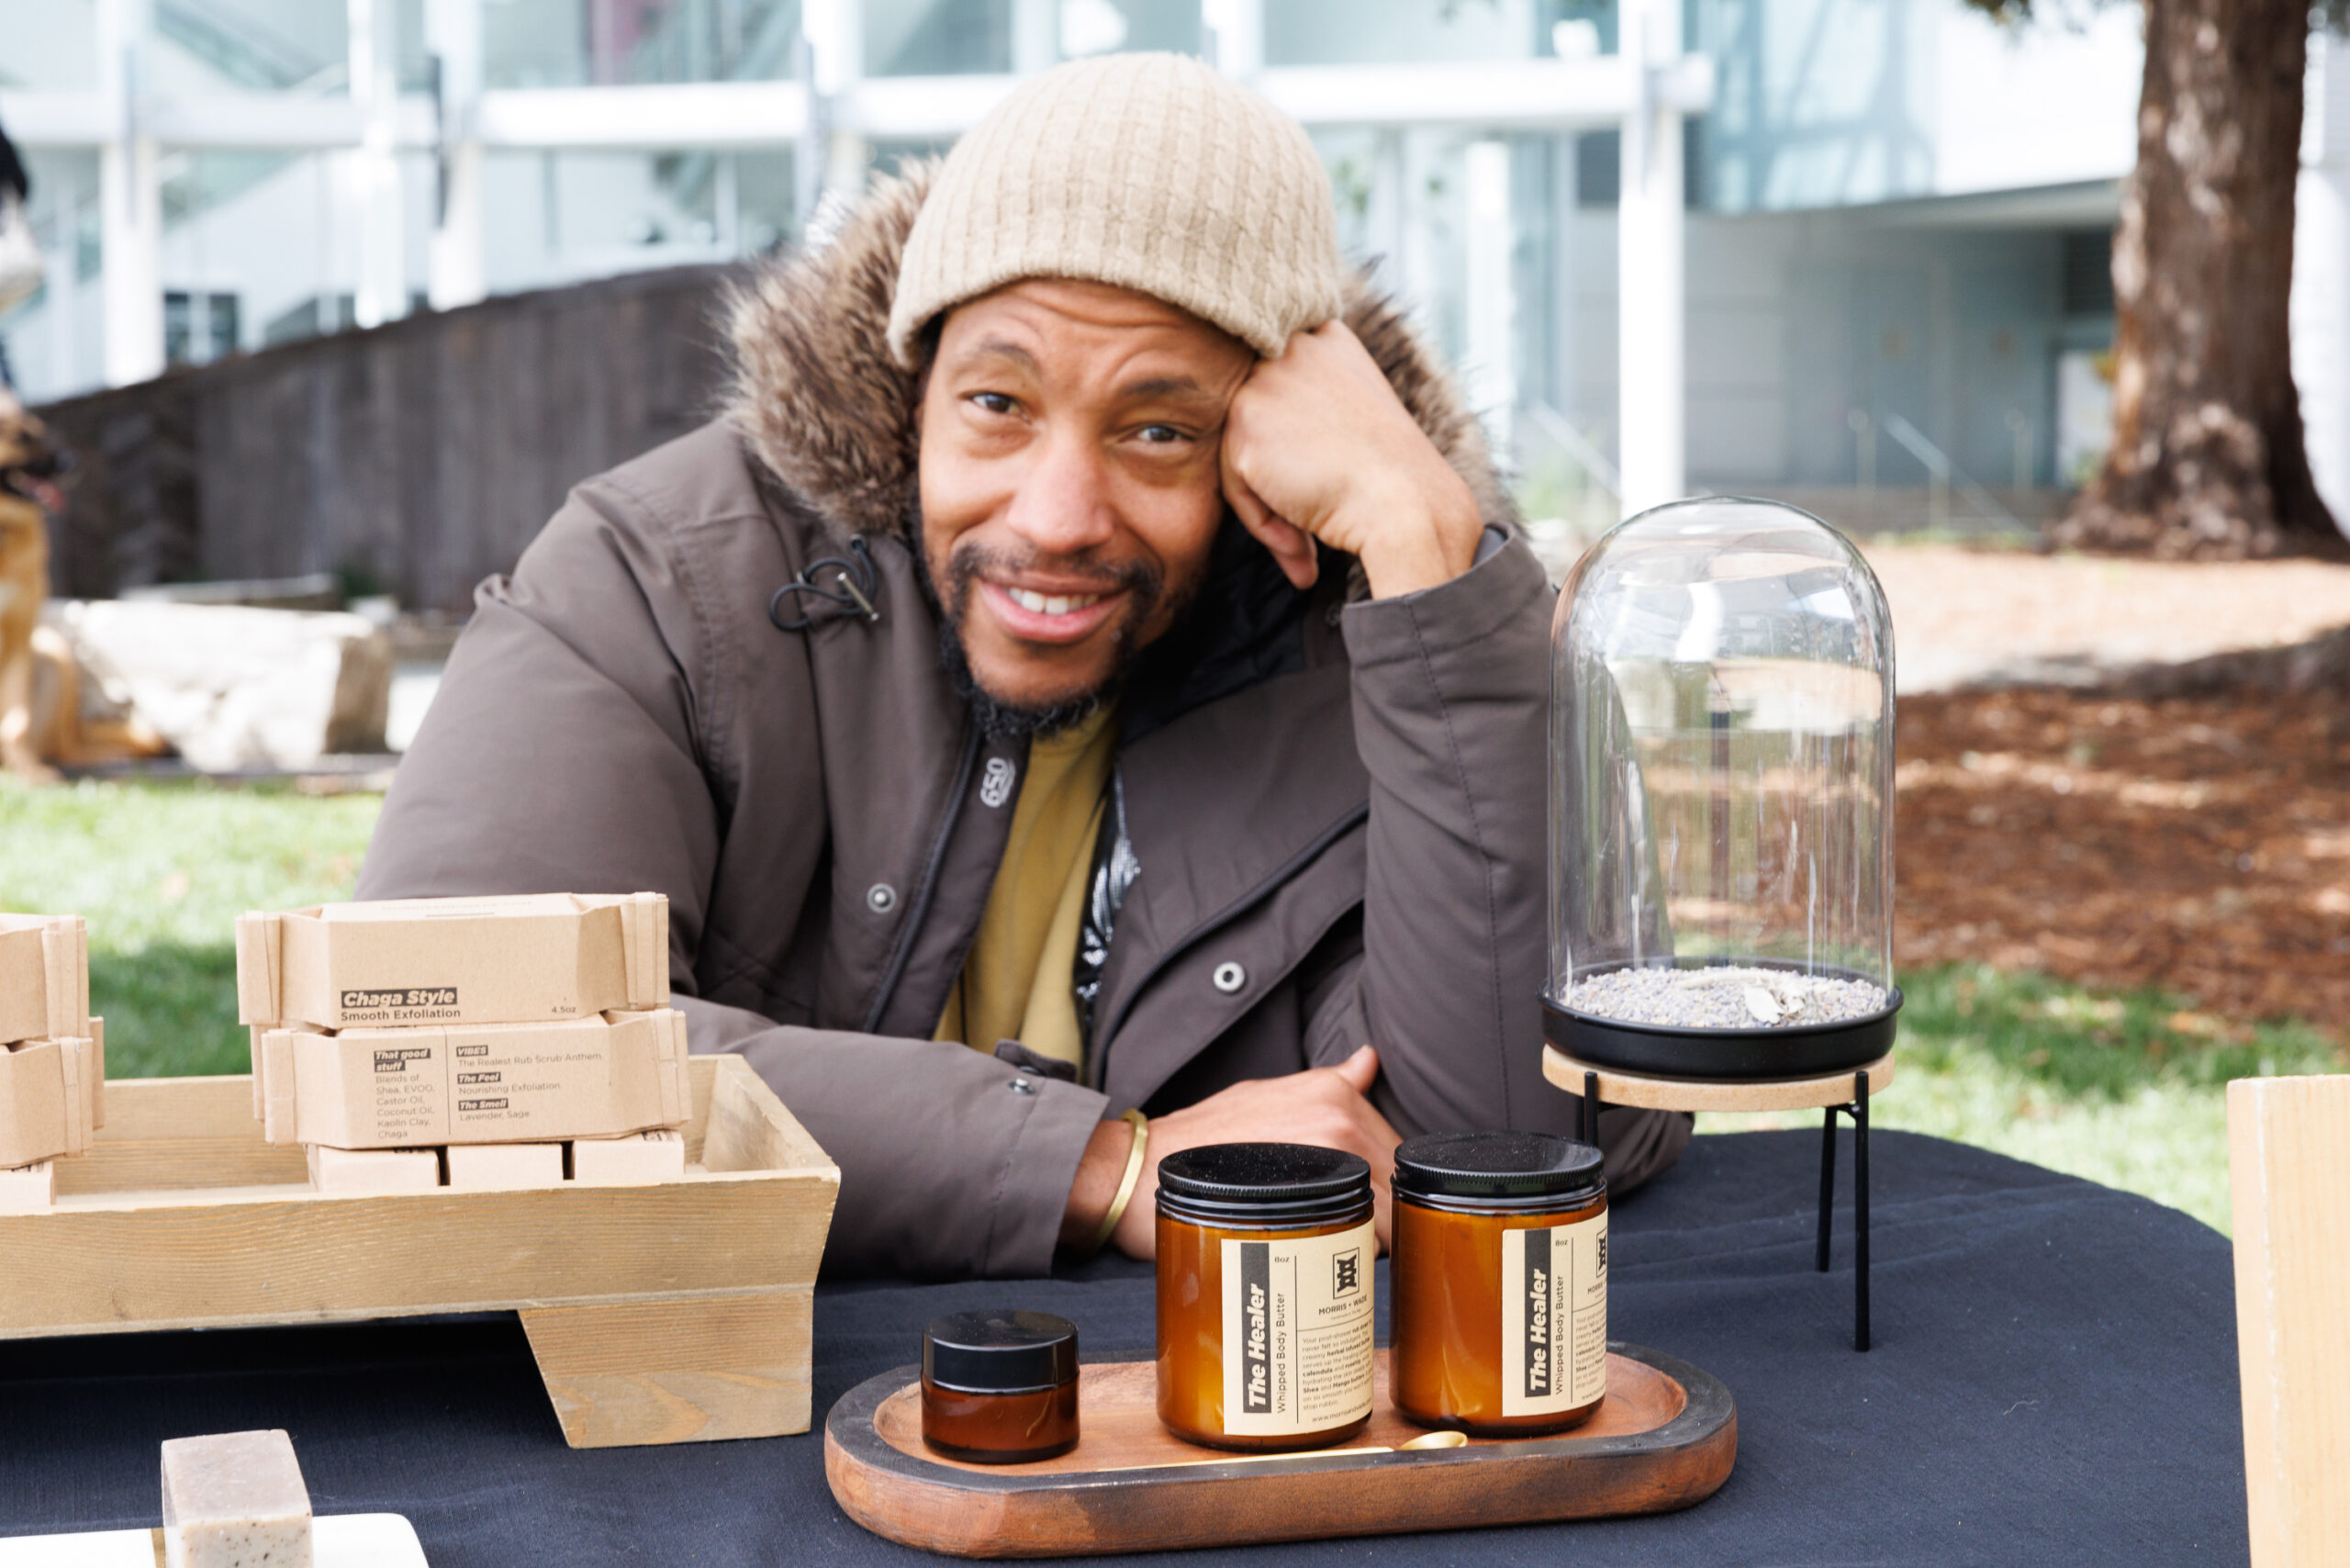 A man smiles at a market stall with candle jars and boxes on display, leaning on his arm, wearing a beanie and jacket.